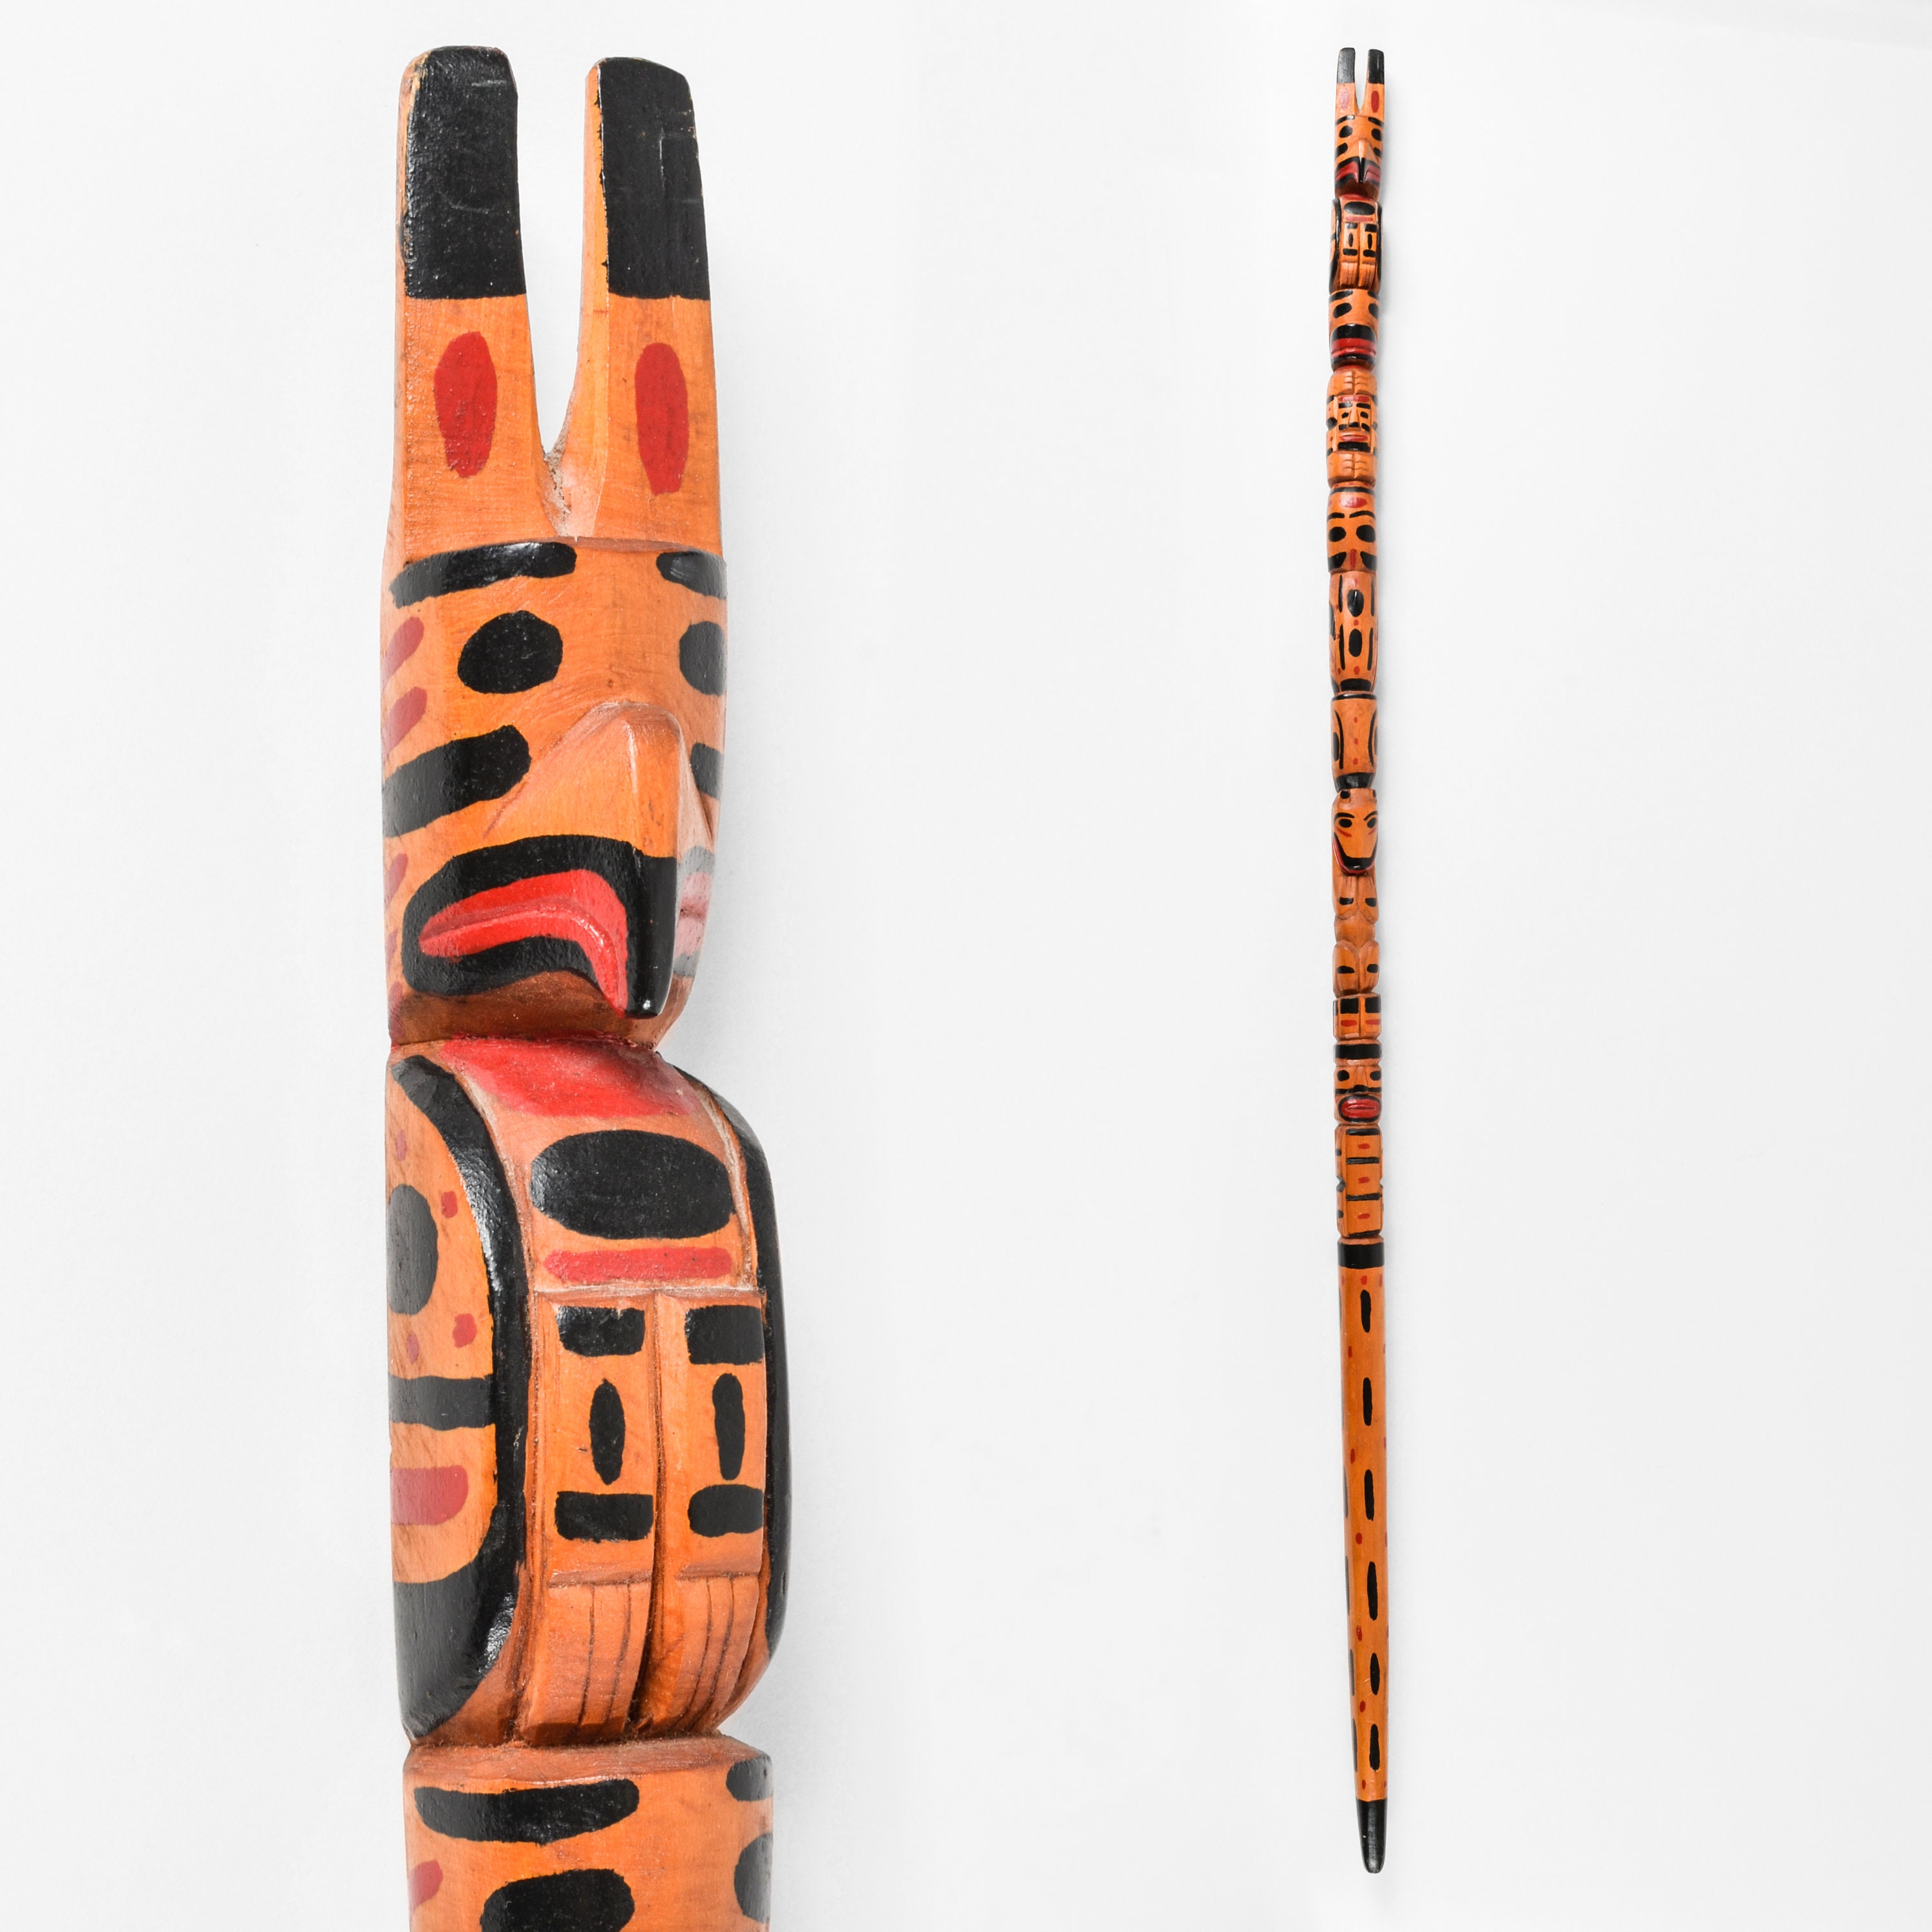 Buy Custom Talking Stick, Group Talk, made to order from Artistic